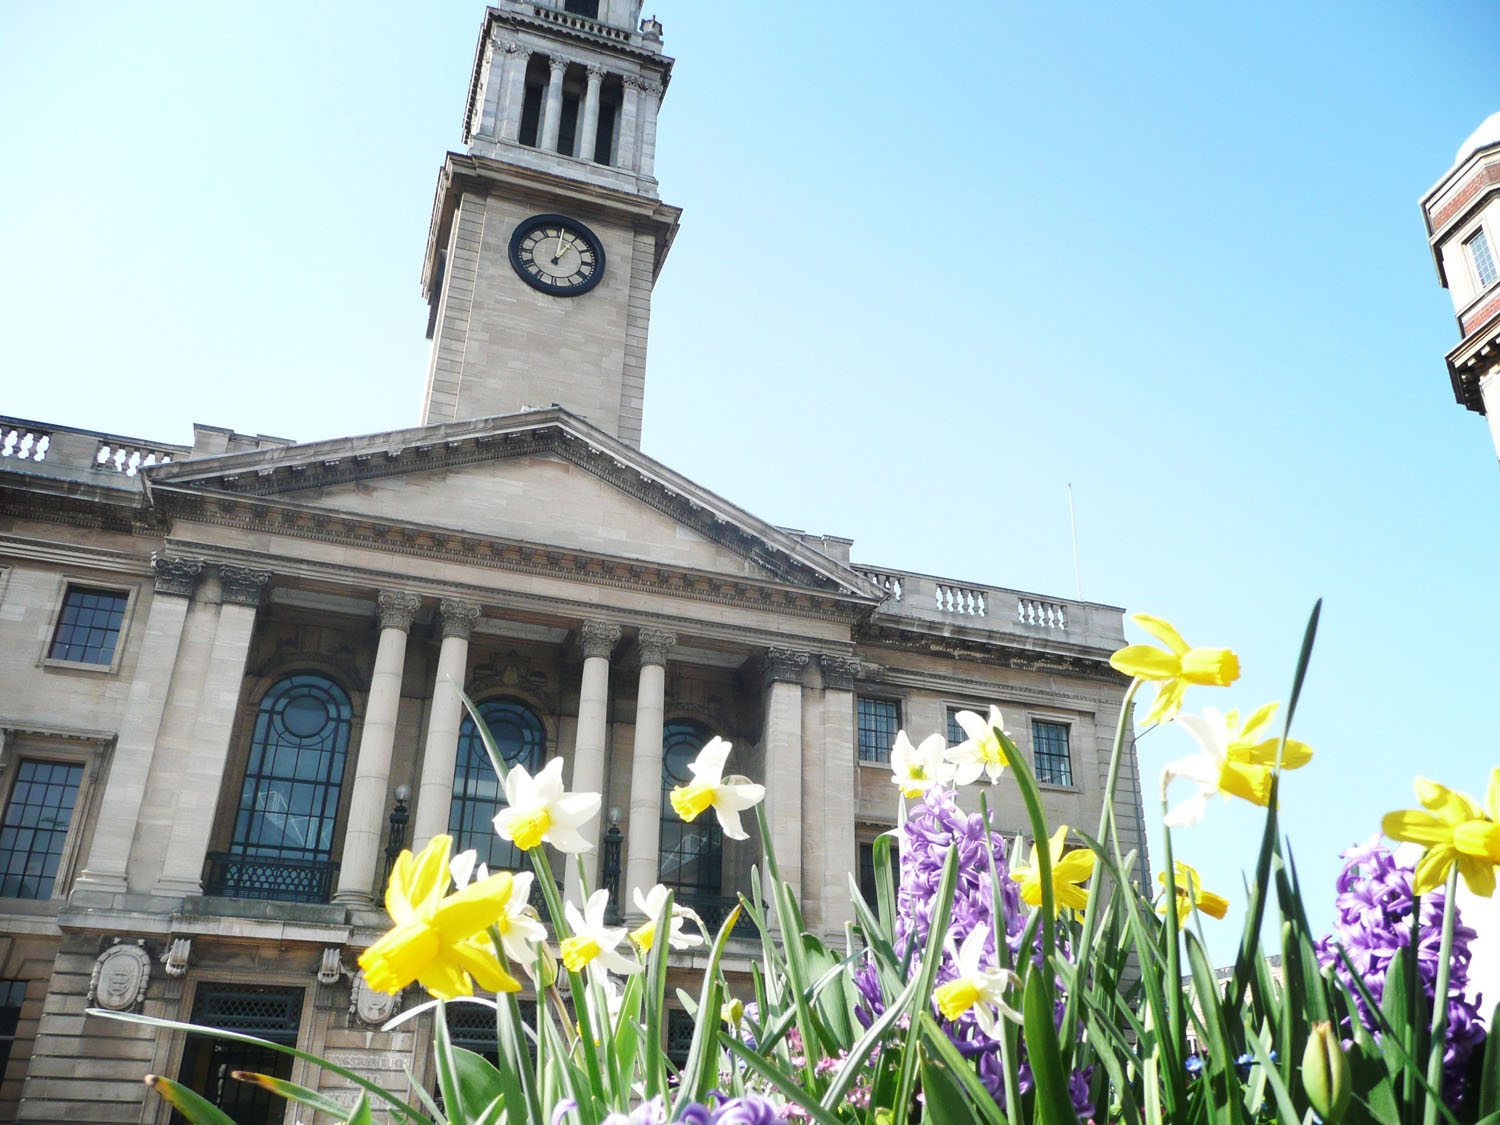 A shot of the Guildhall in Hull. The building is in the background and spring flowers are in the foreground